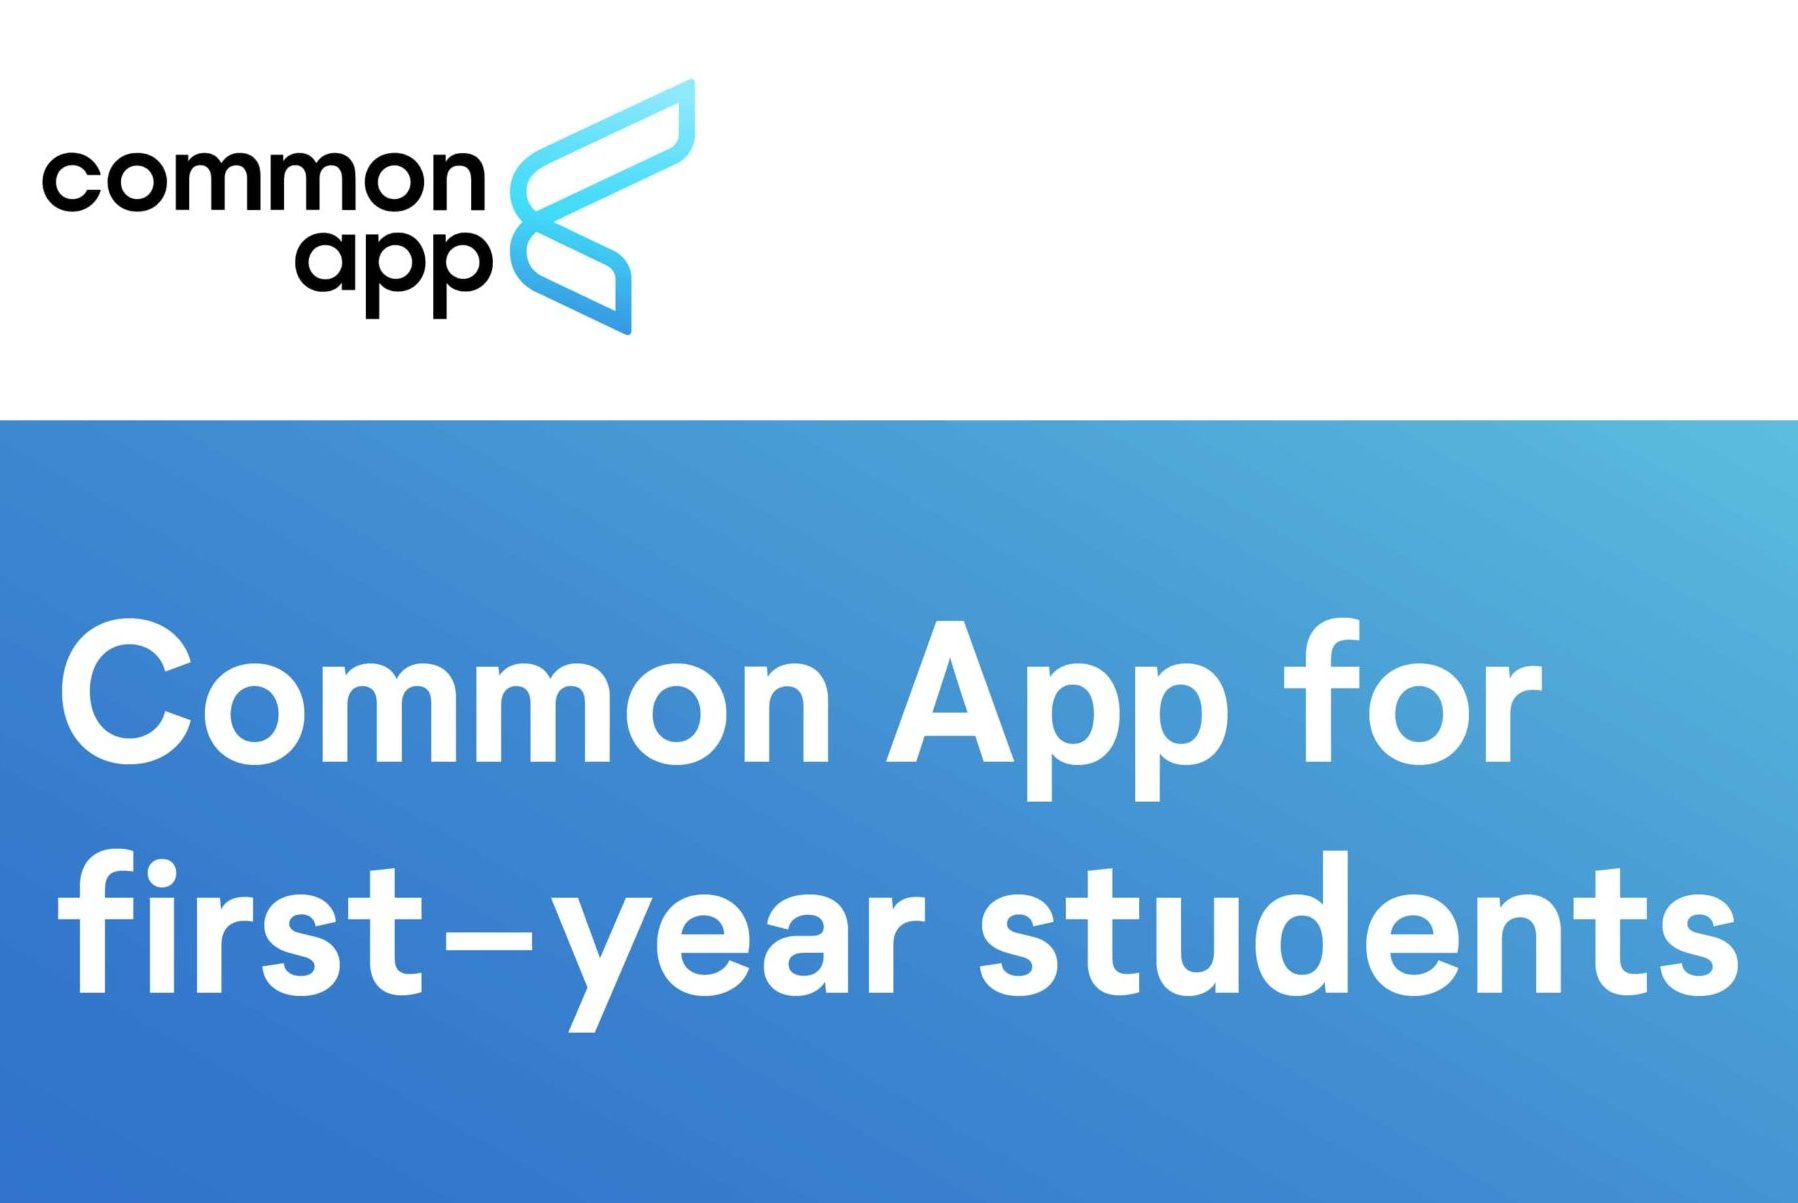 How to Navigate the Common App